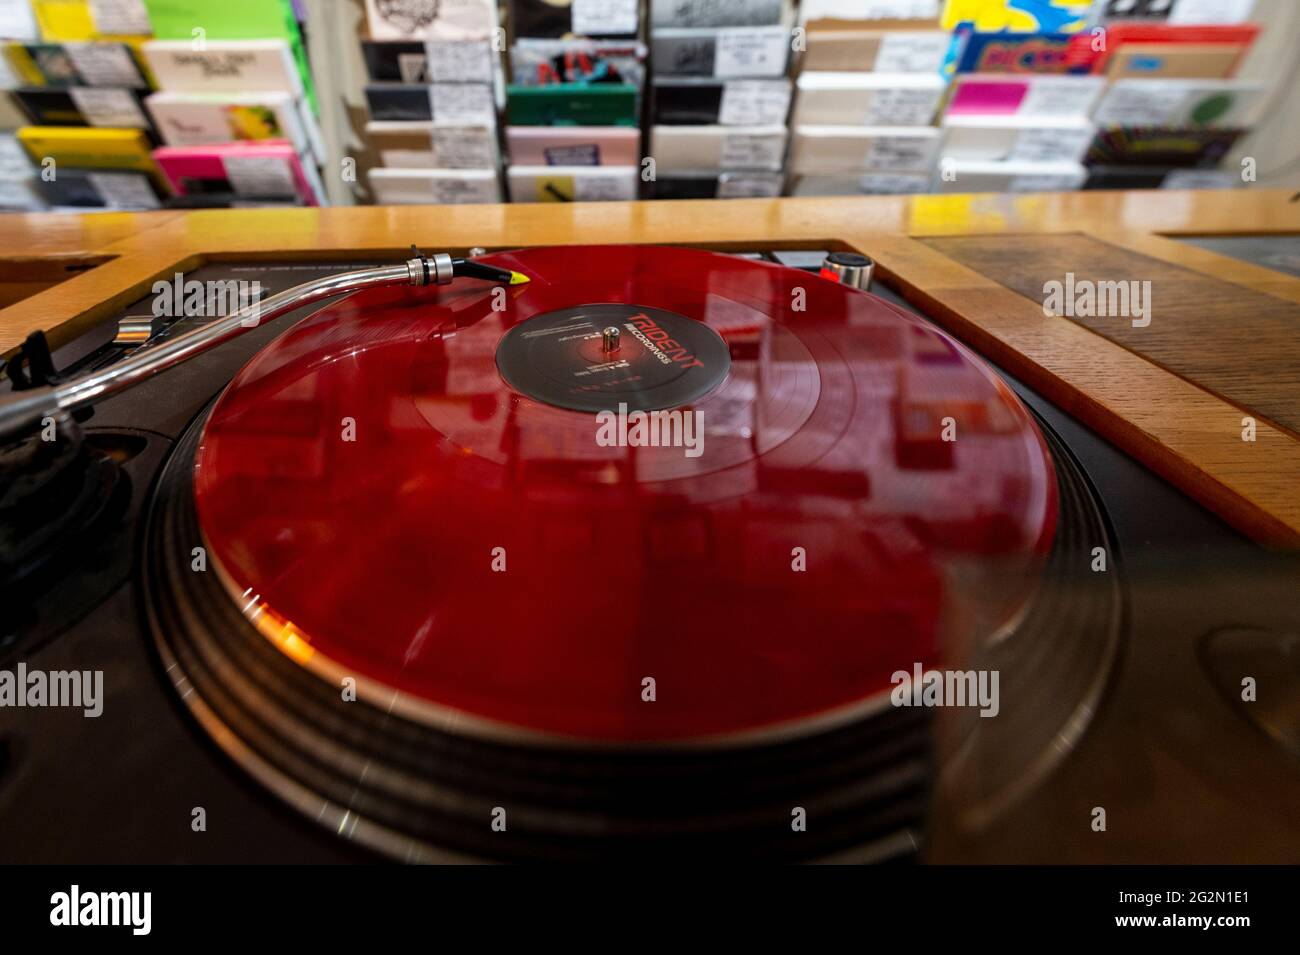 London Uk 12 June 21 A Turntable In Phonica Records In Soho On Record Store Day Where Independent Record Shops Worldwide Celebrate Music Including Special Vinyl Releases Made Exclusively For The Day